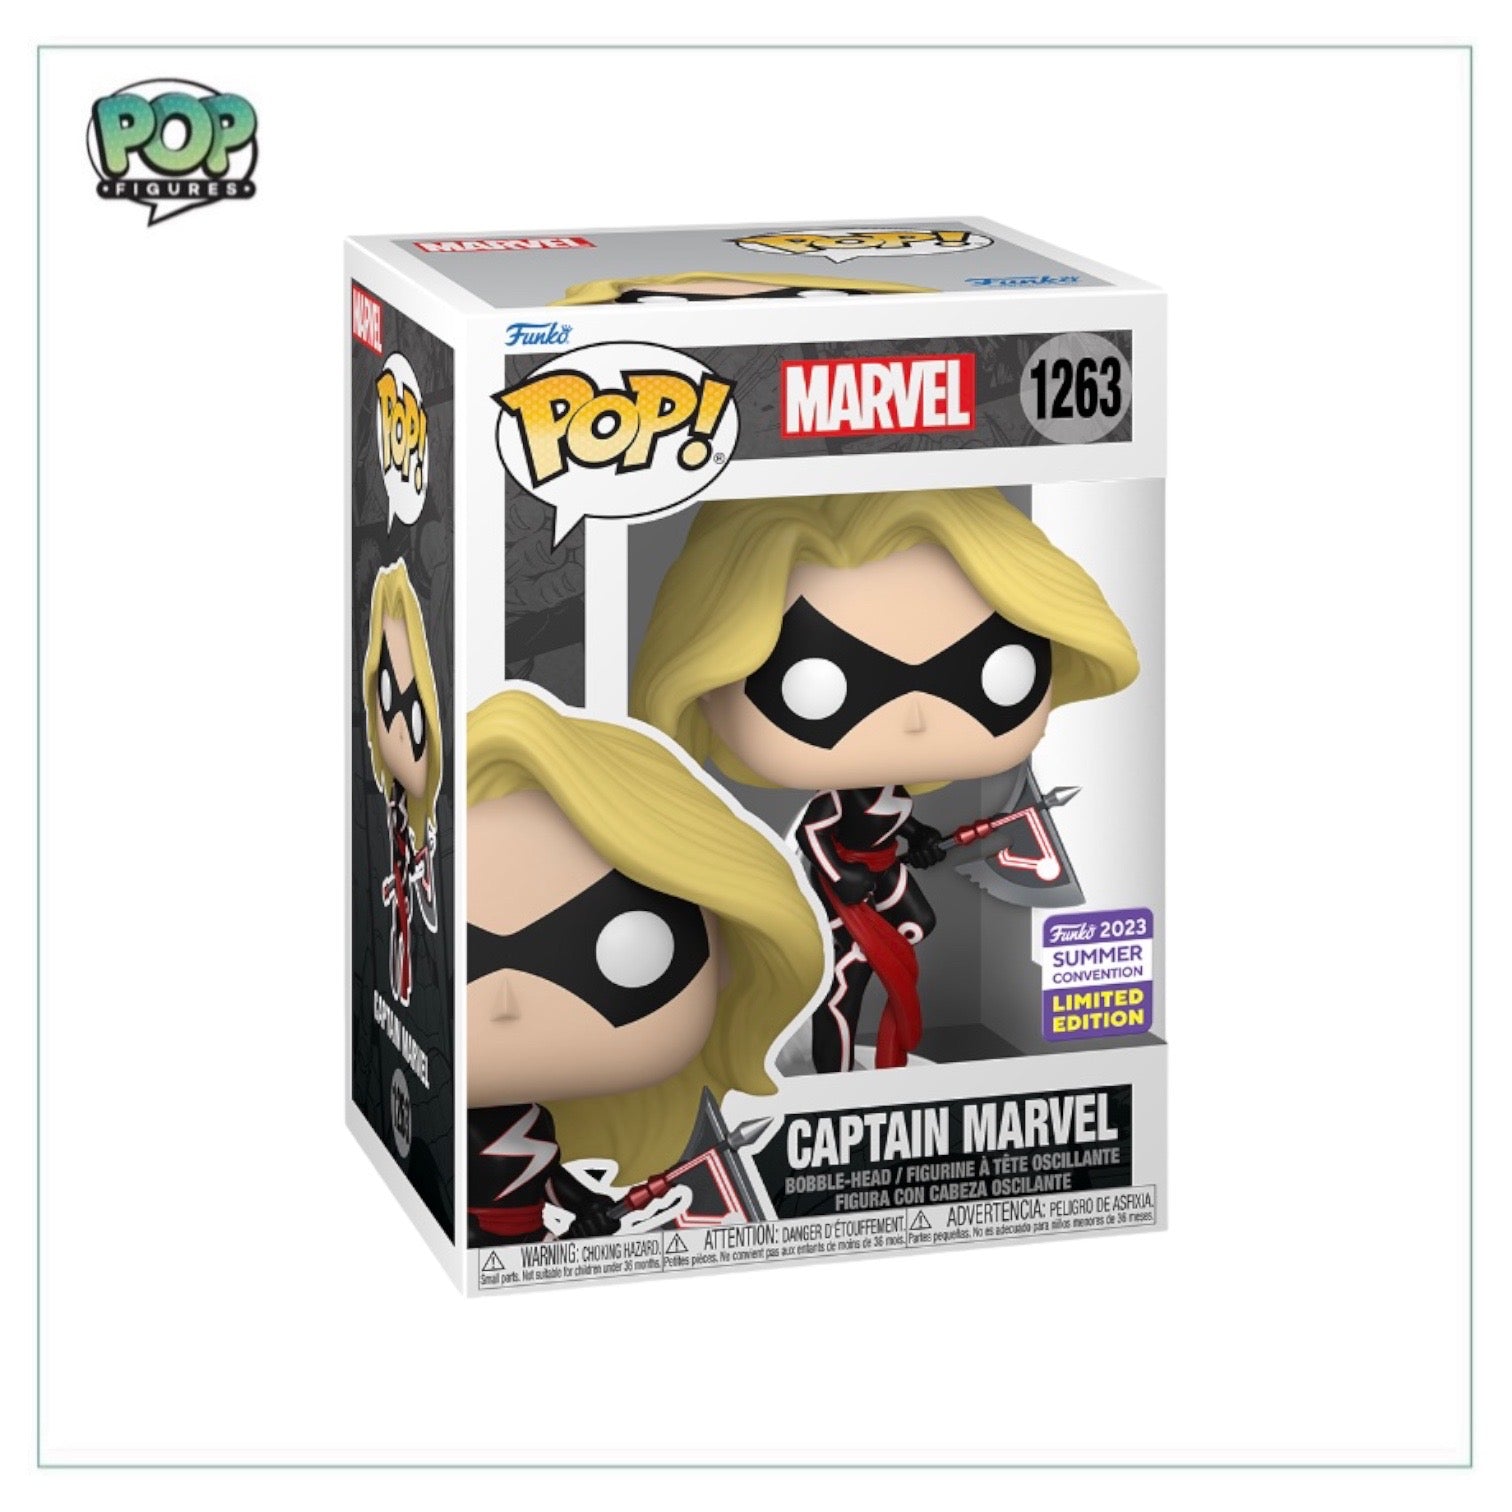 Captain Marvel #1263 Funko Pop! - Marvel - SDCC 2023 Shared Exclusive